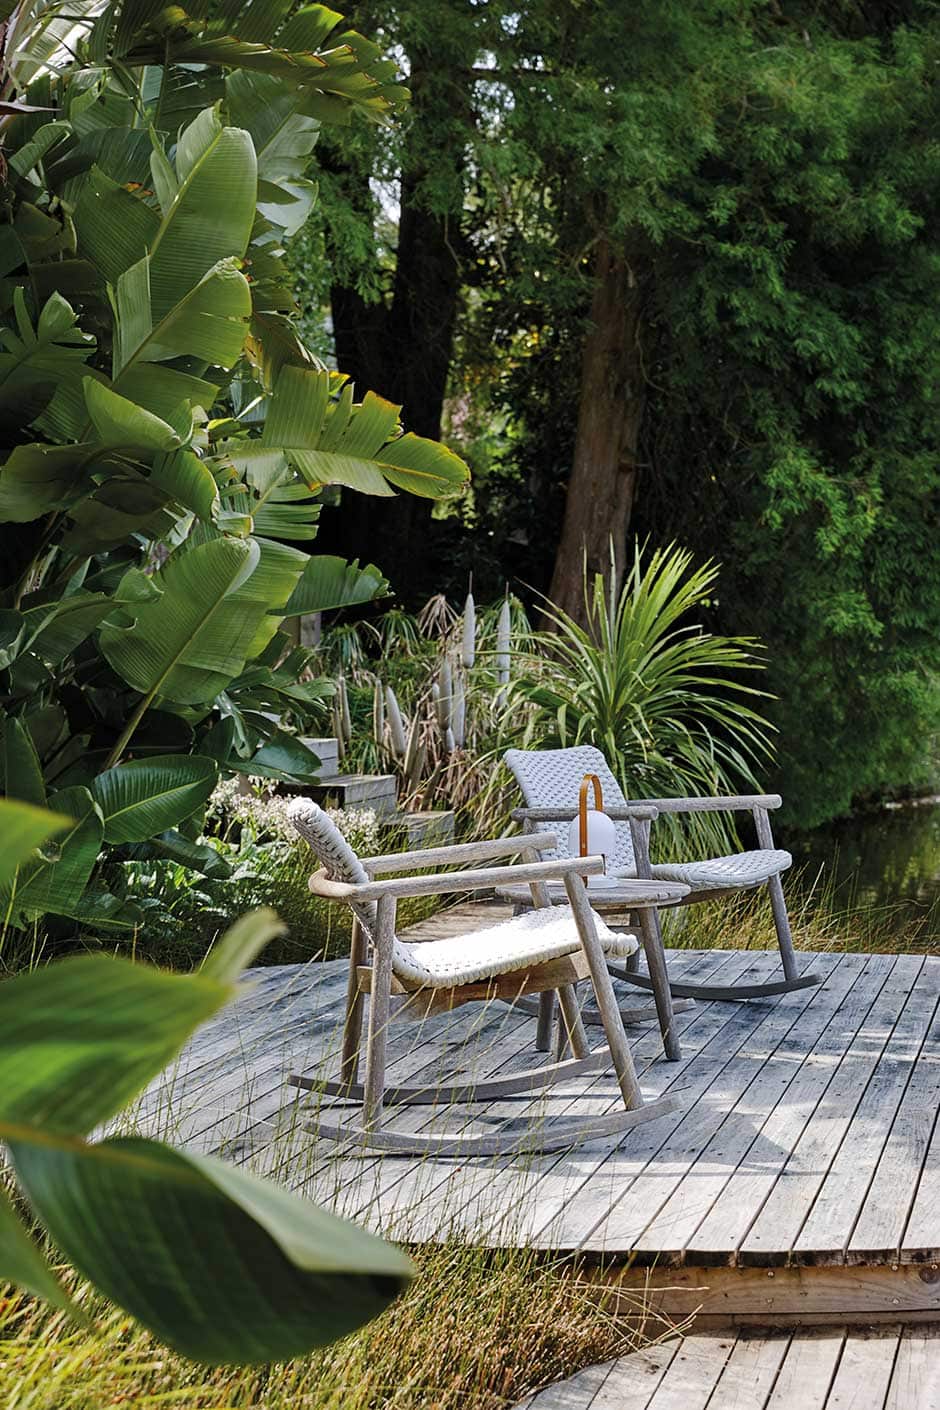 Lilypad decks designed by Kirsten Sach are a whimsical highlight of this garden